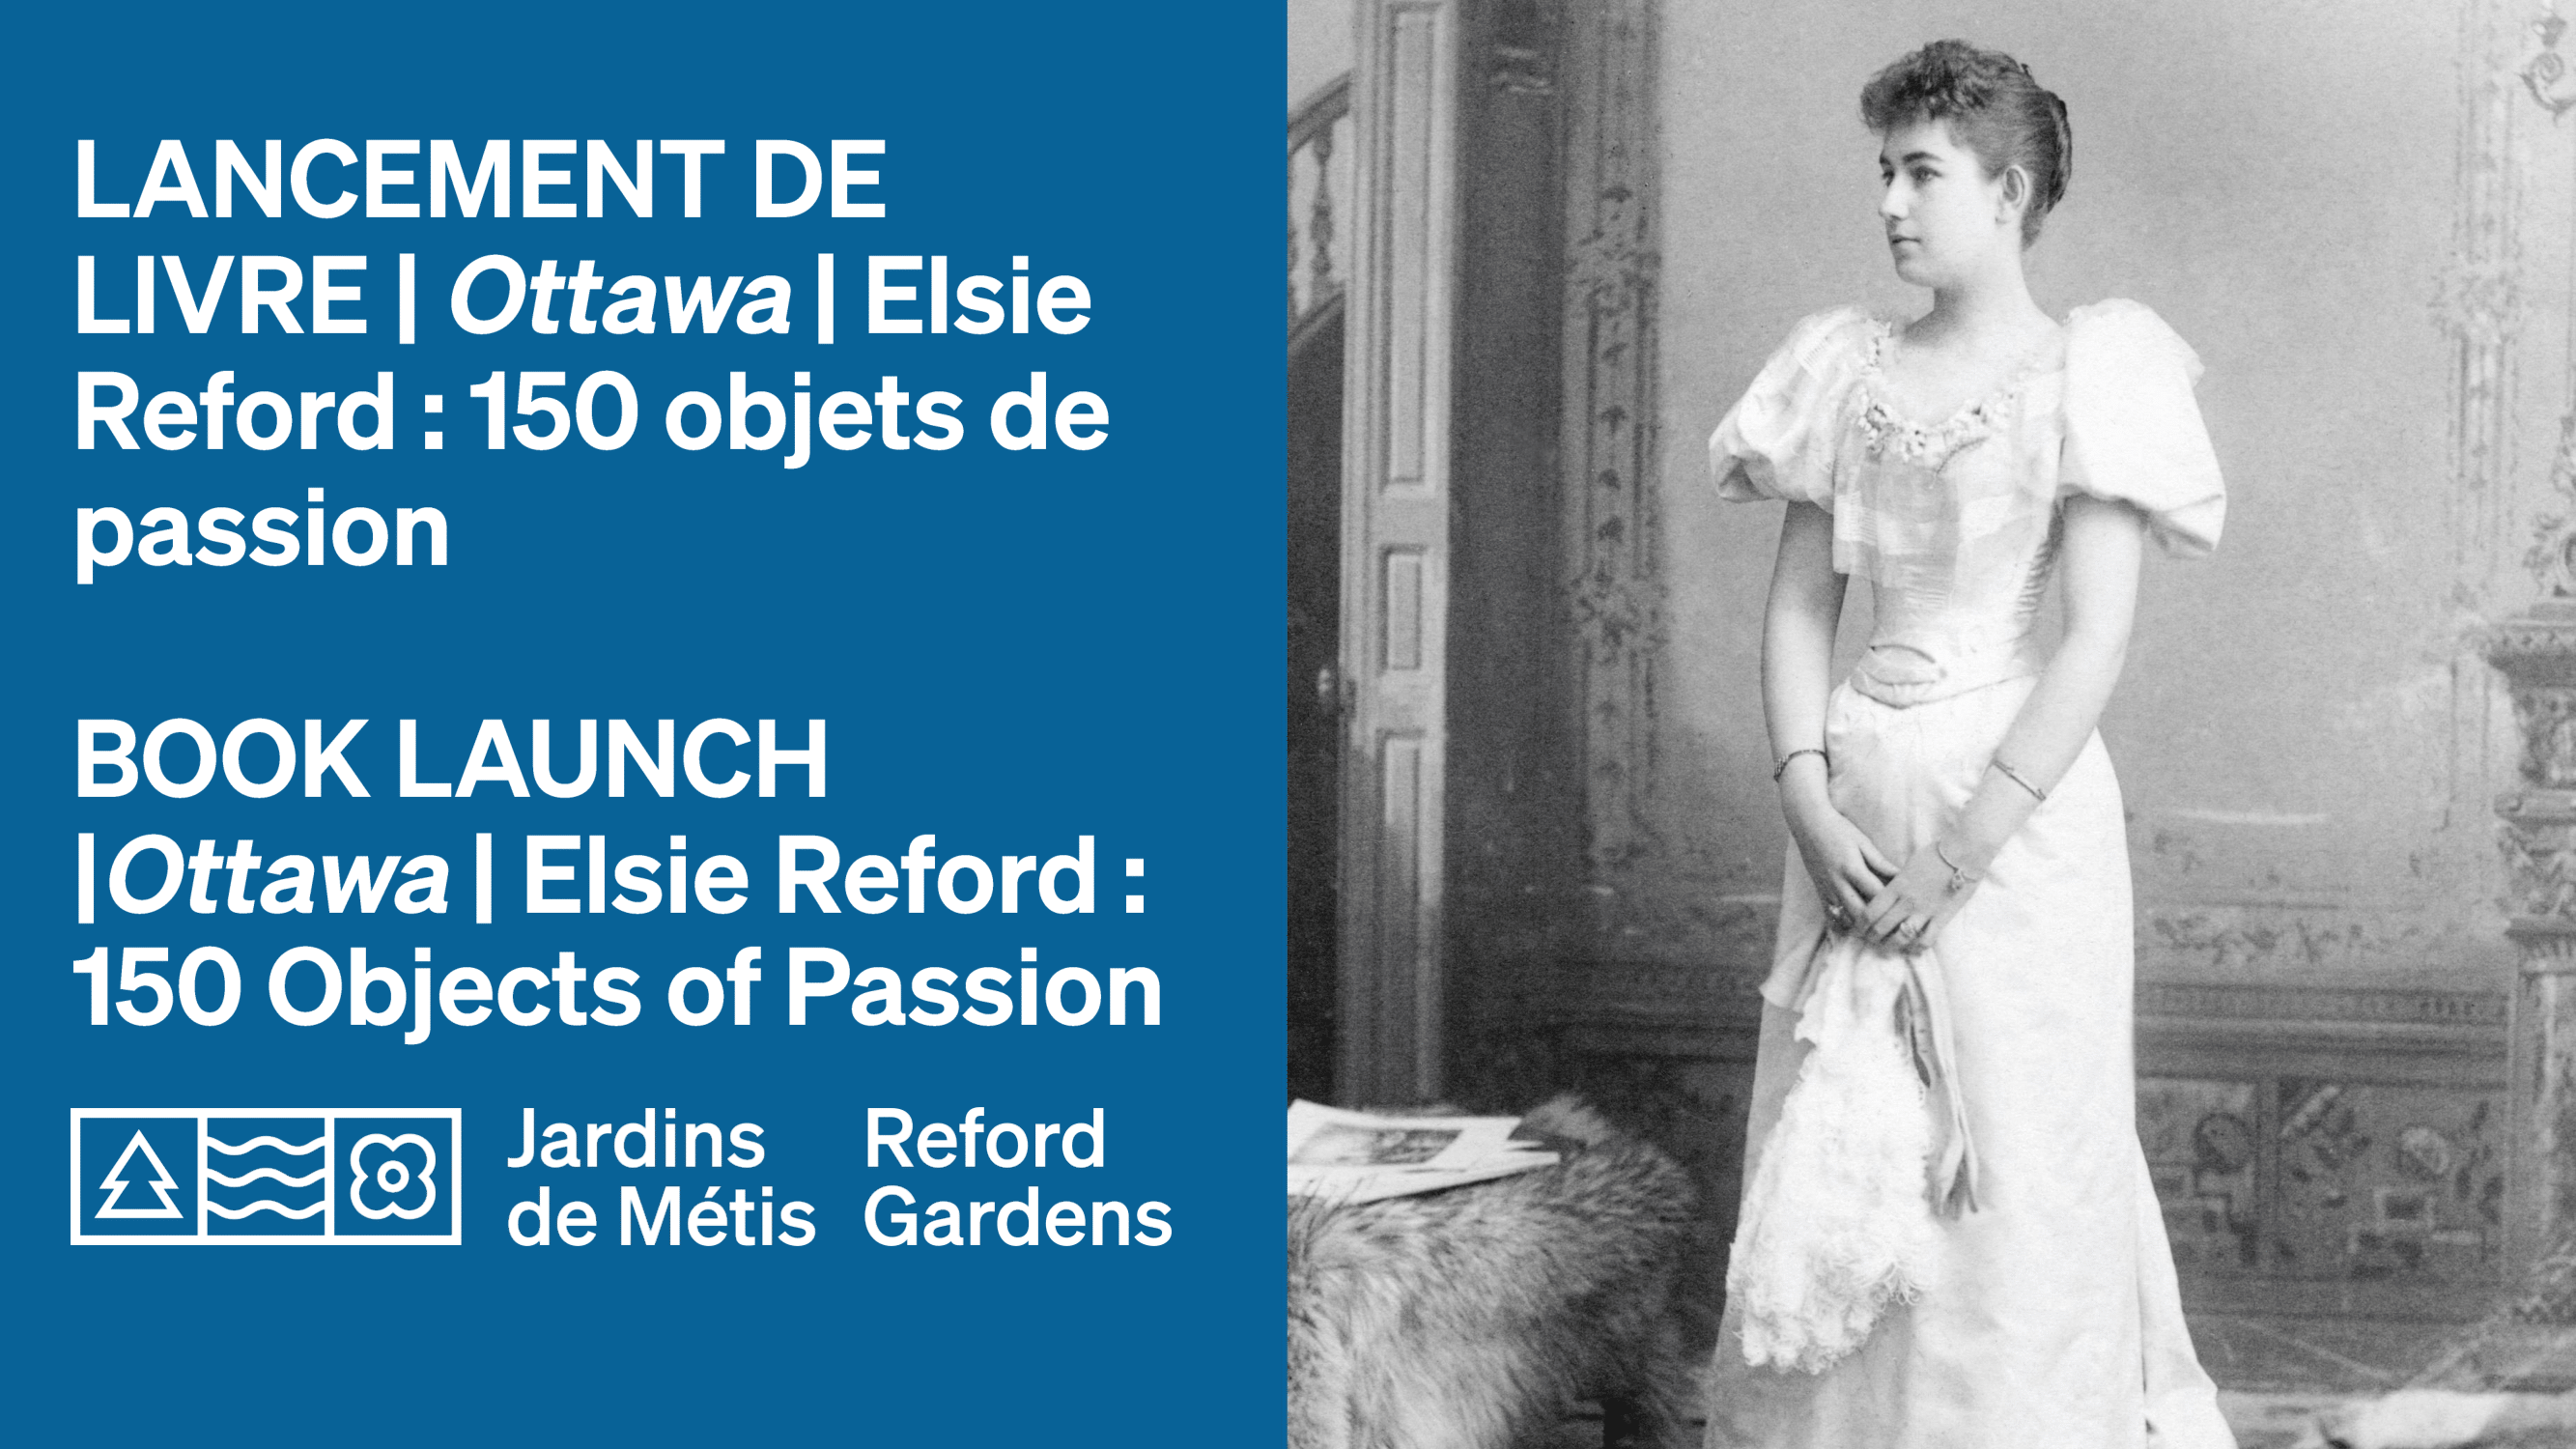 BOOK LAUNCH | Ottawa | Elsie Reford : 150 Objects of Passion